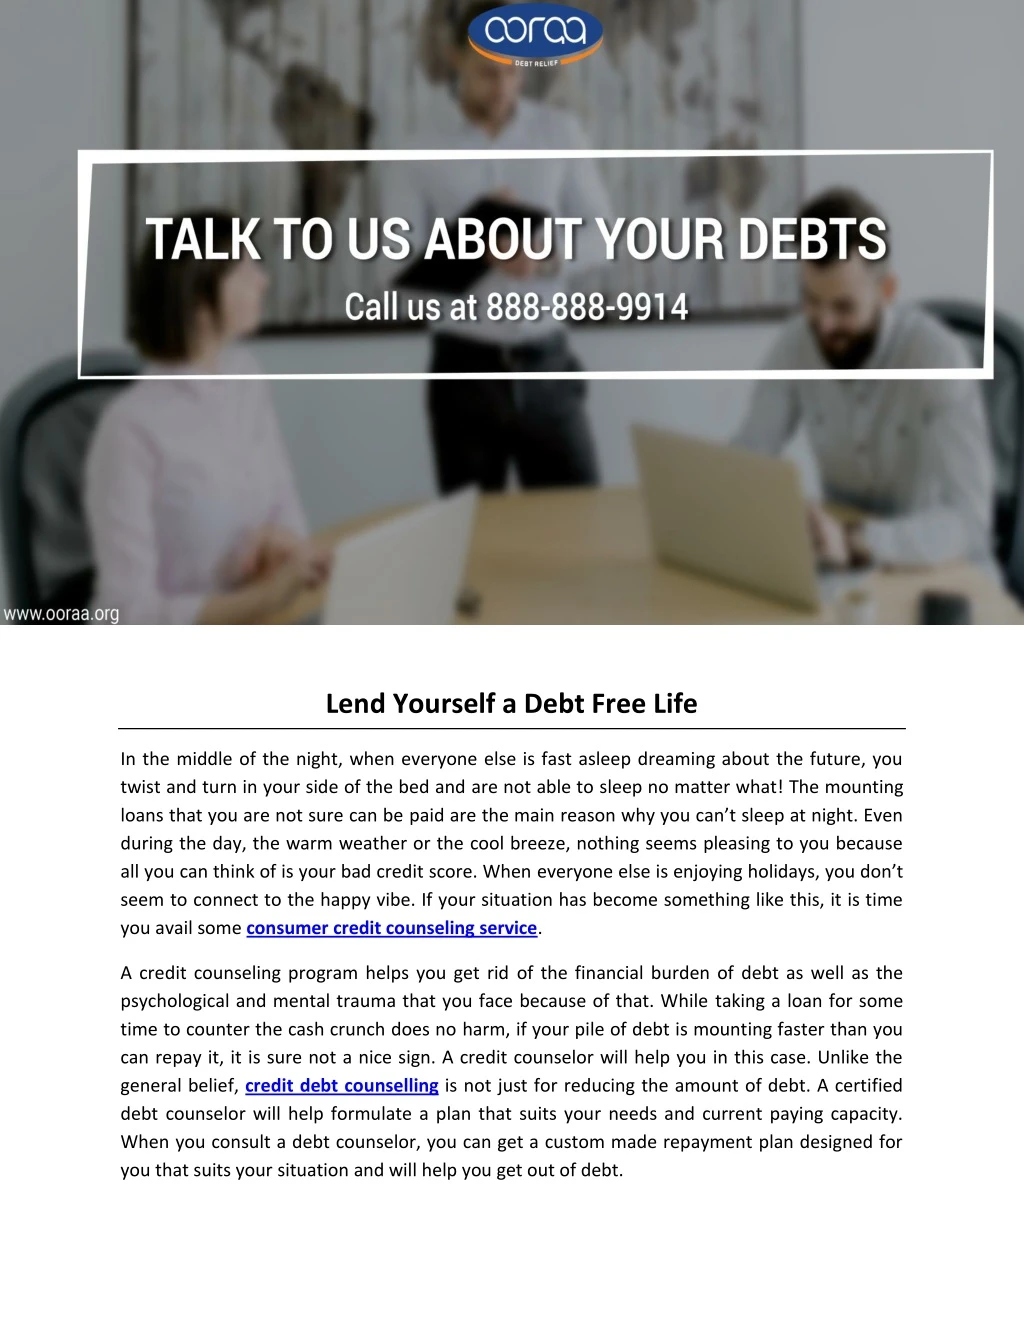 lend yourself a debt free life